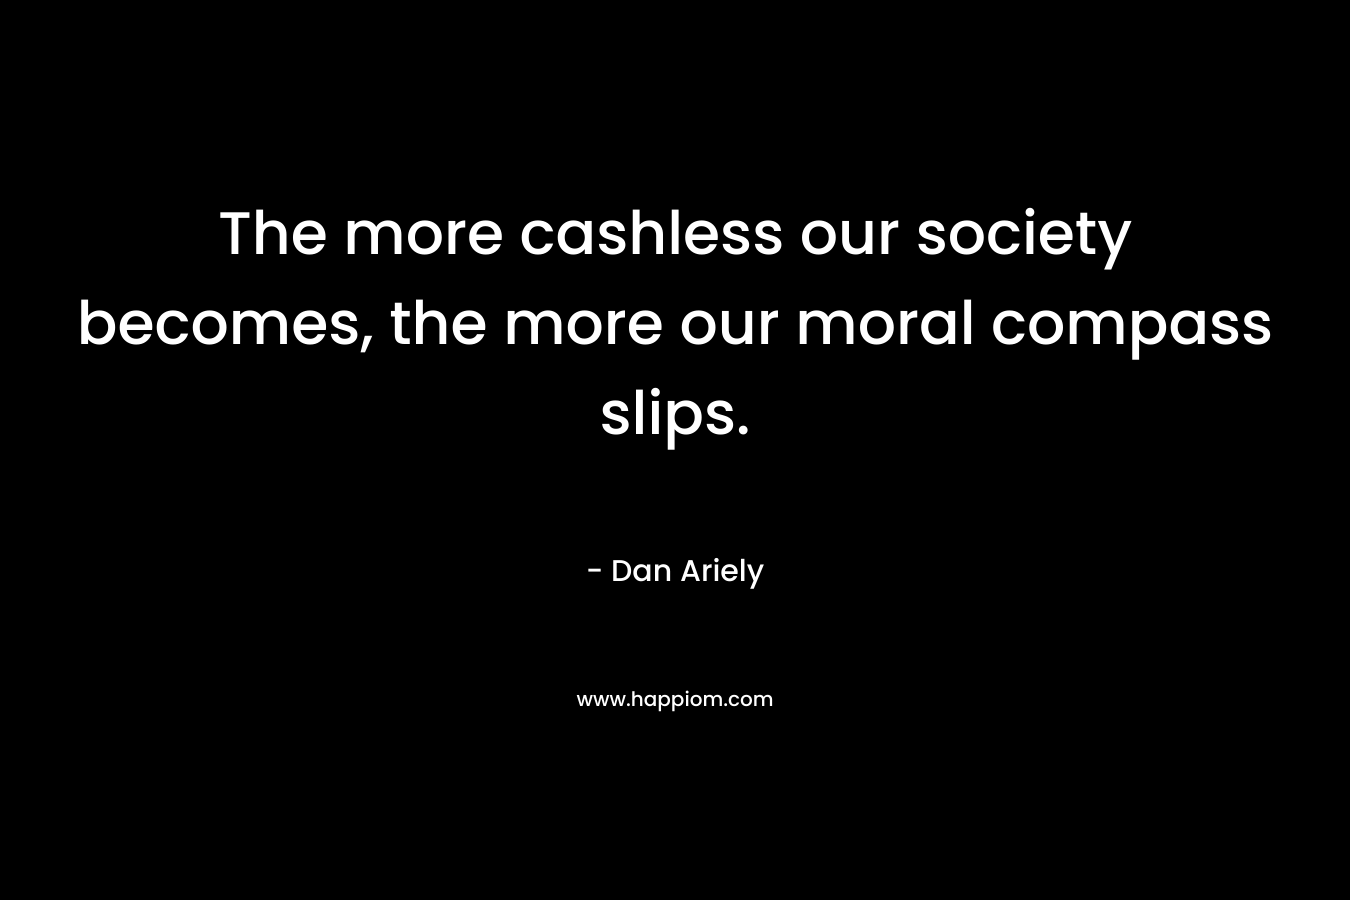 The more cashless our society becomes, the more our moral compass slips.